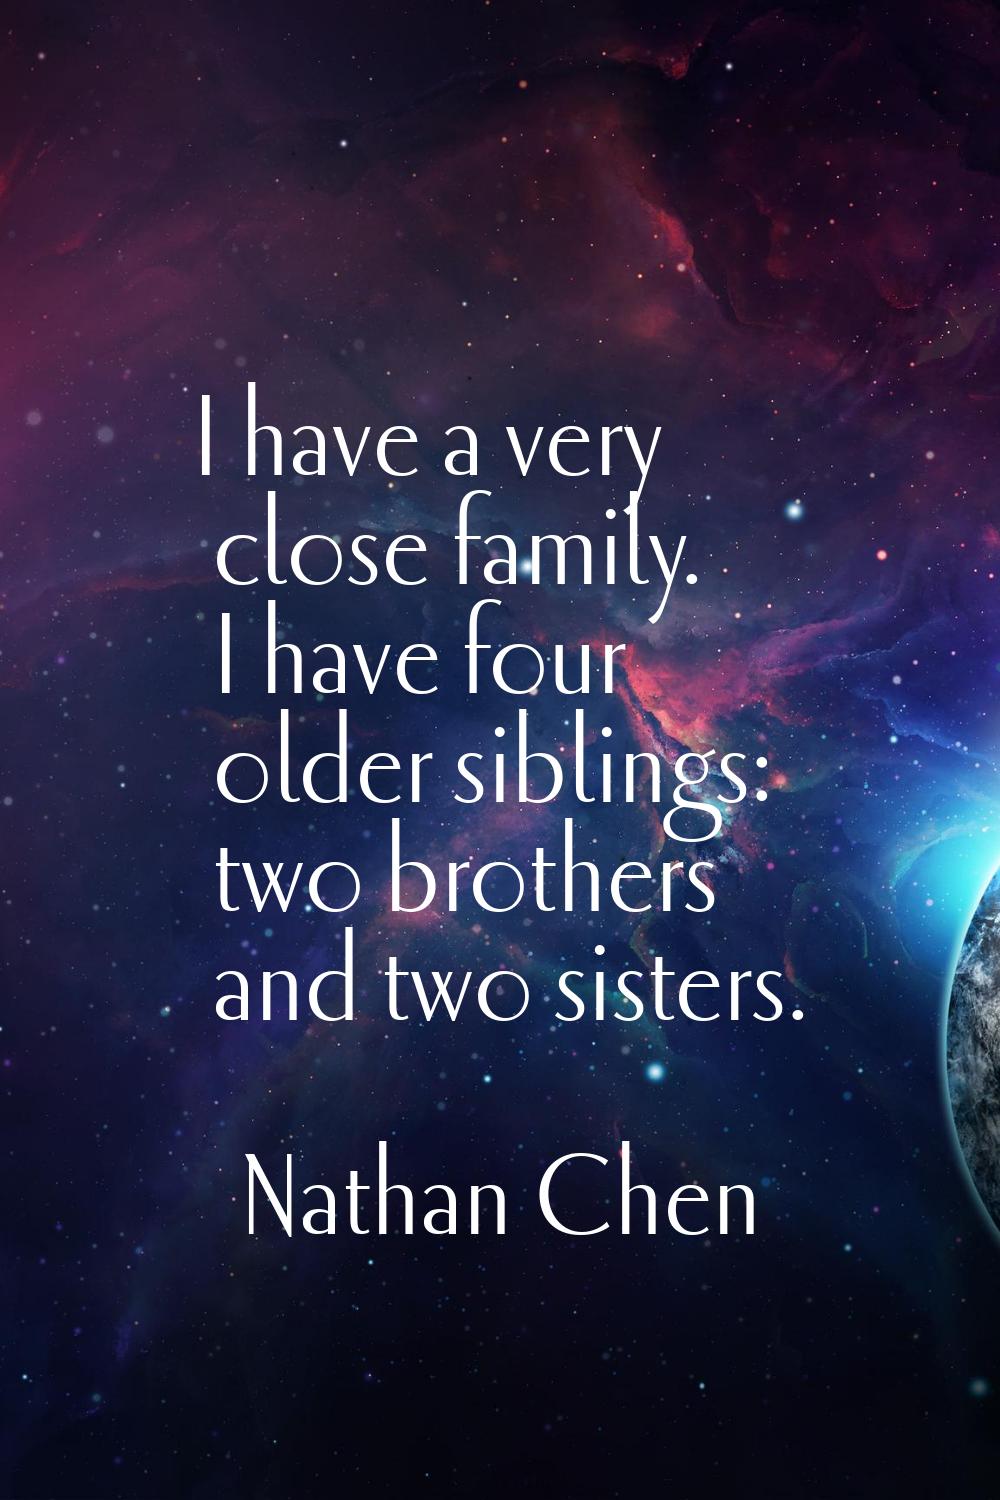 I have a very close family. I have four older siblings: two brothers and two sisters.